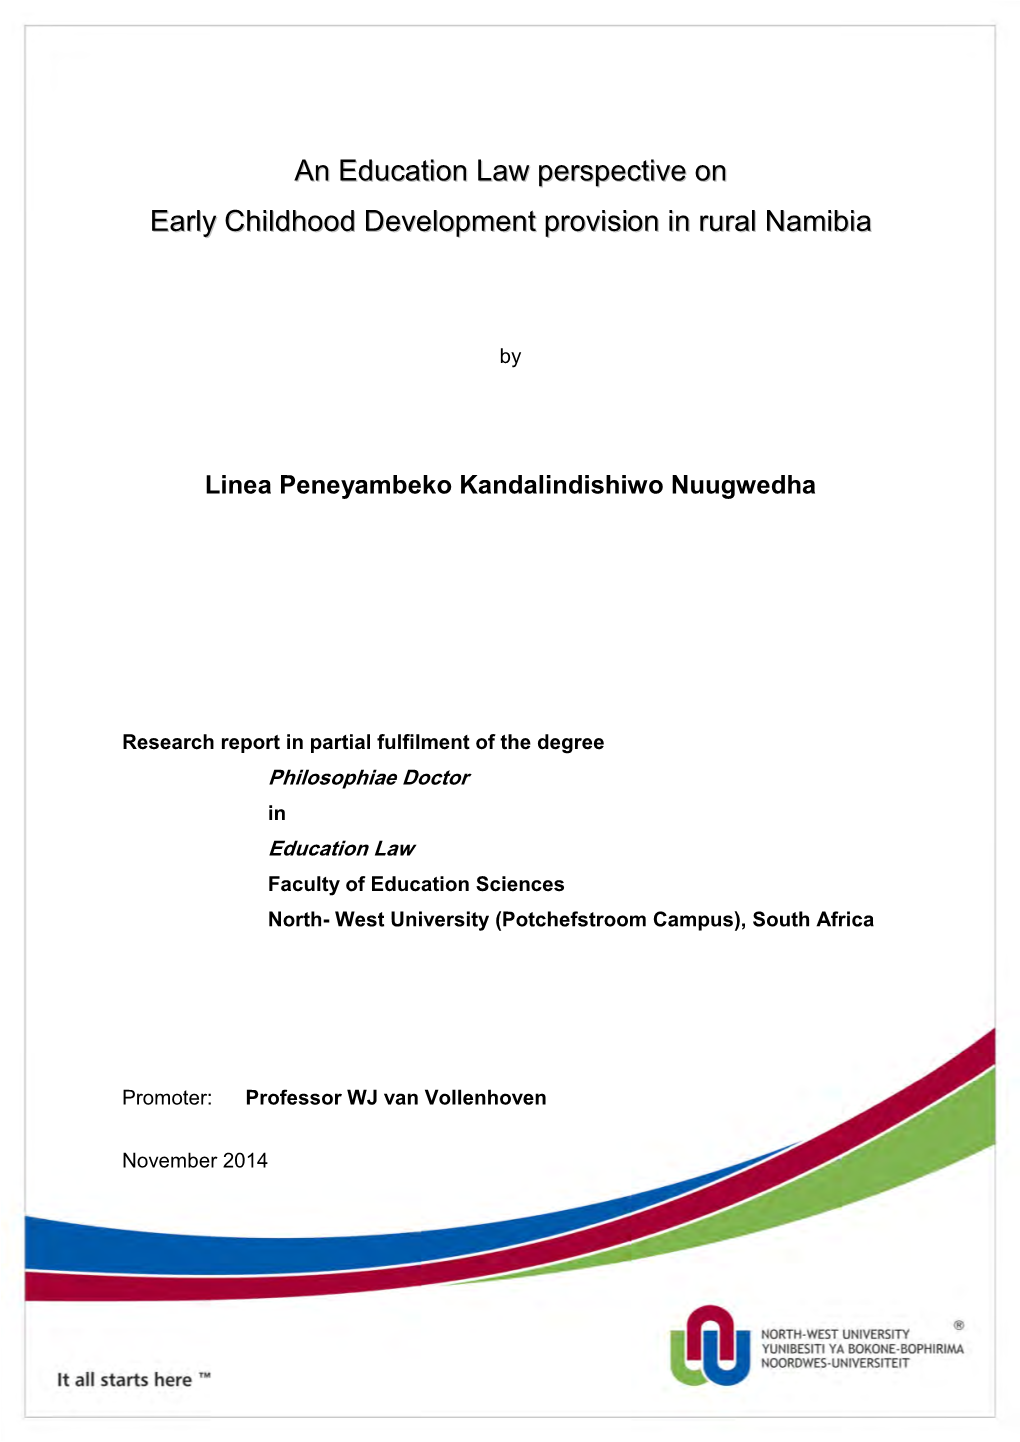 An Education Law Perspective on Early Childhood Development Provision in Rural Namibia